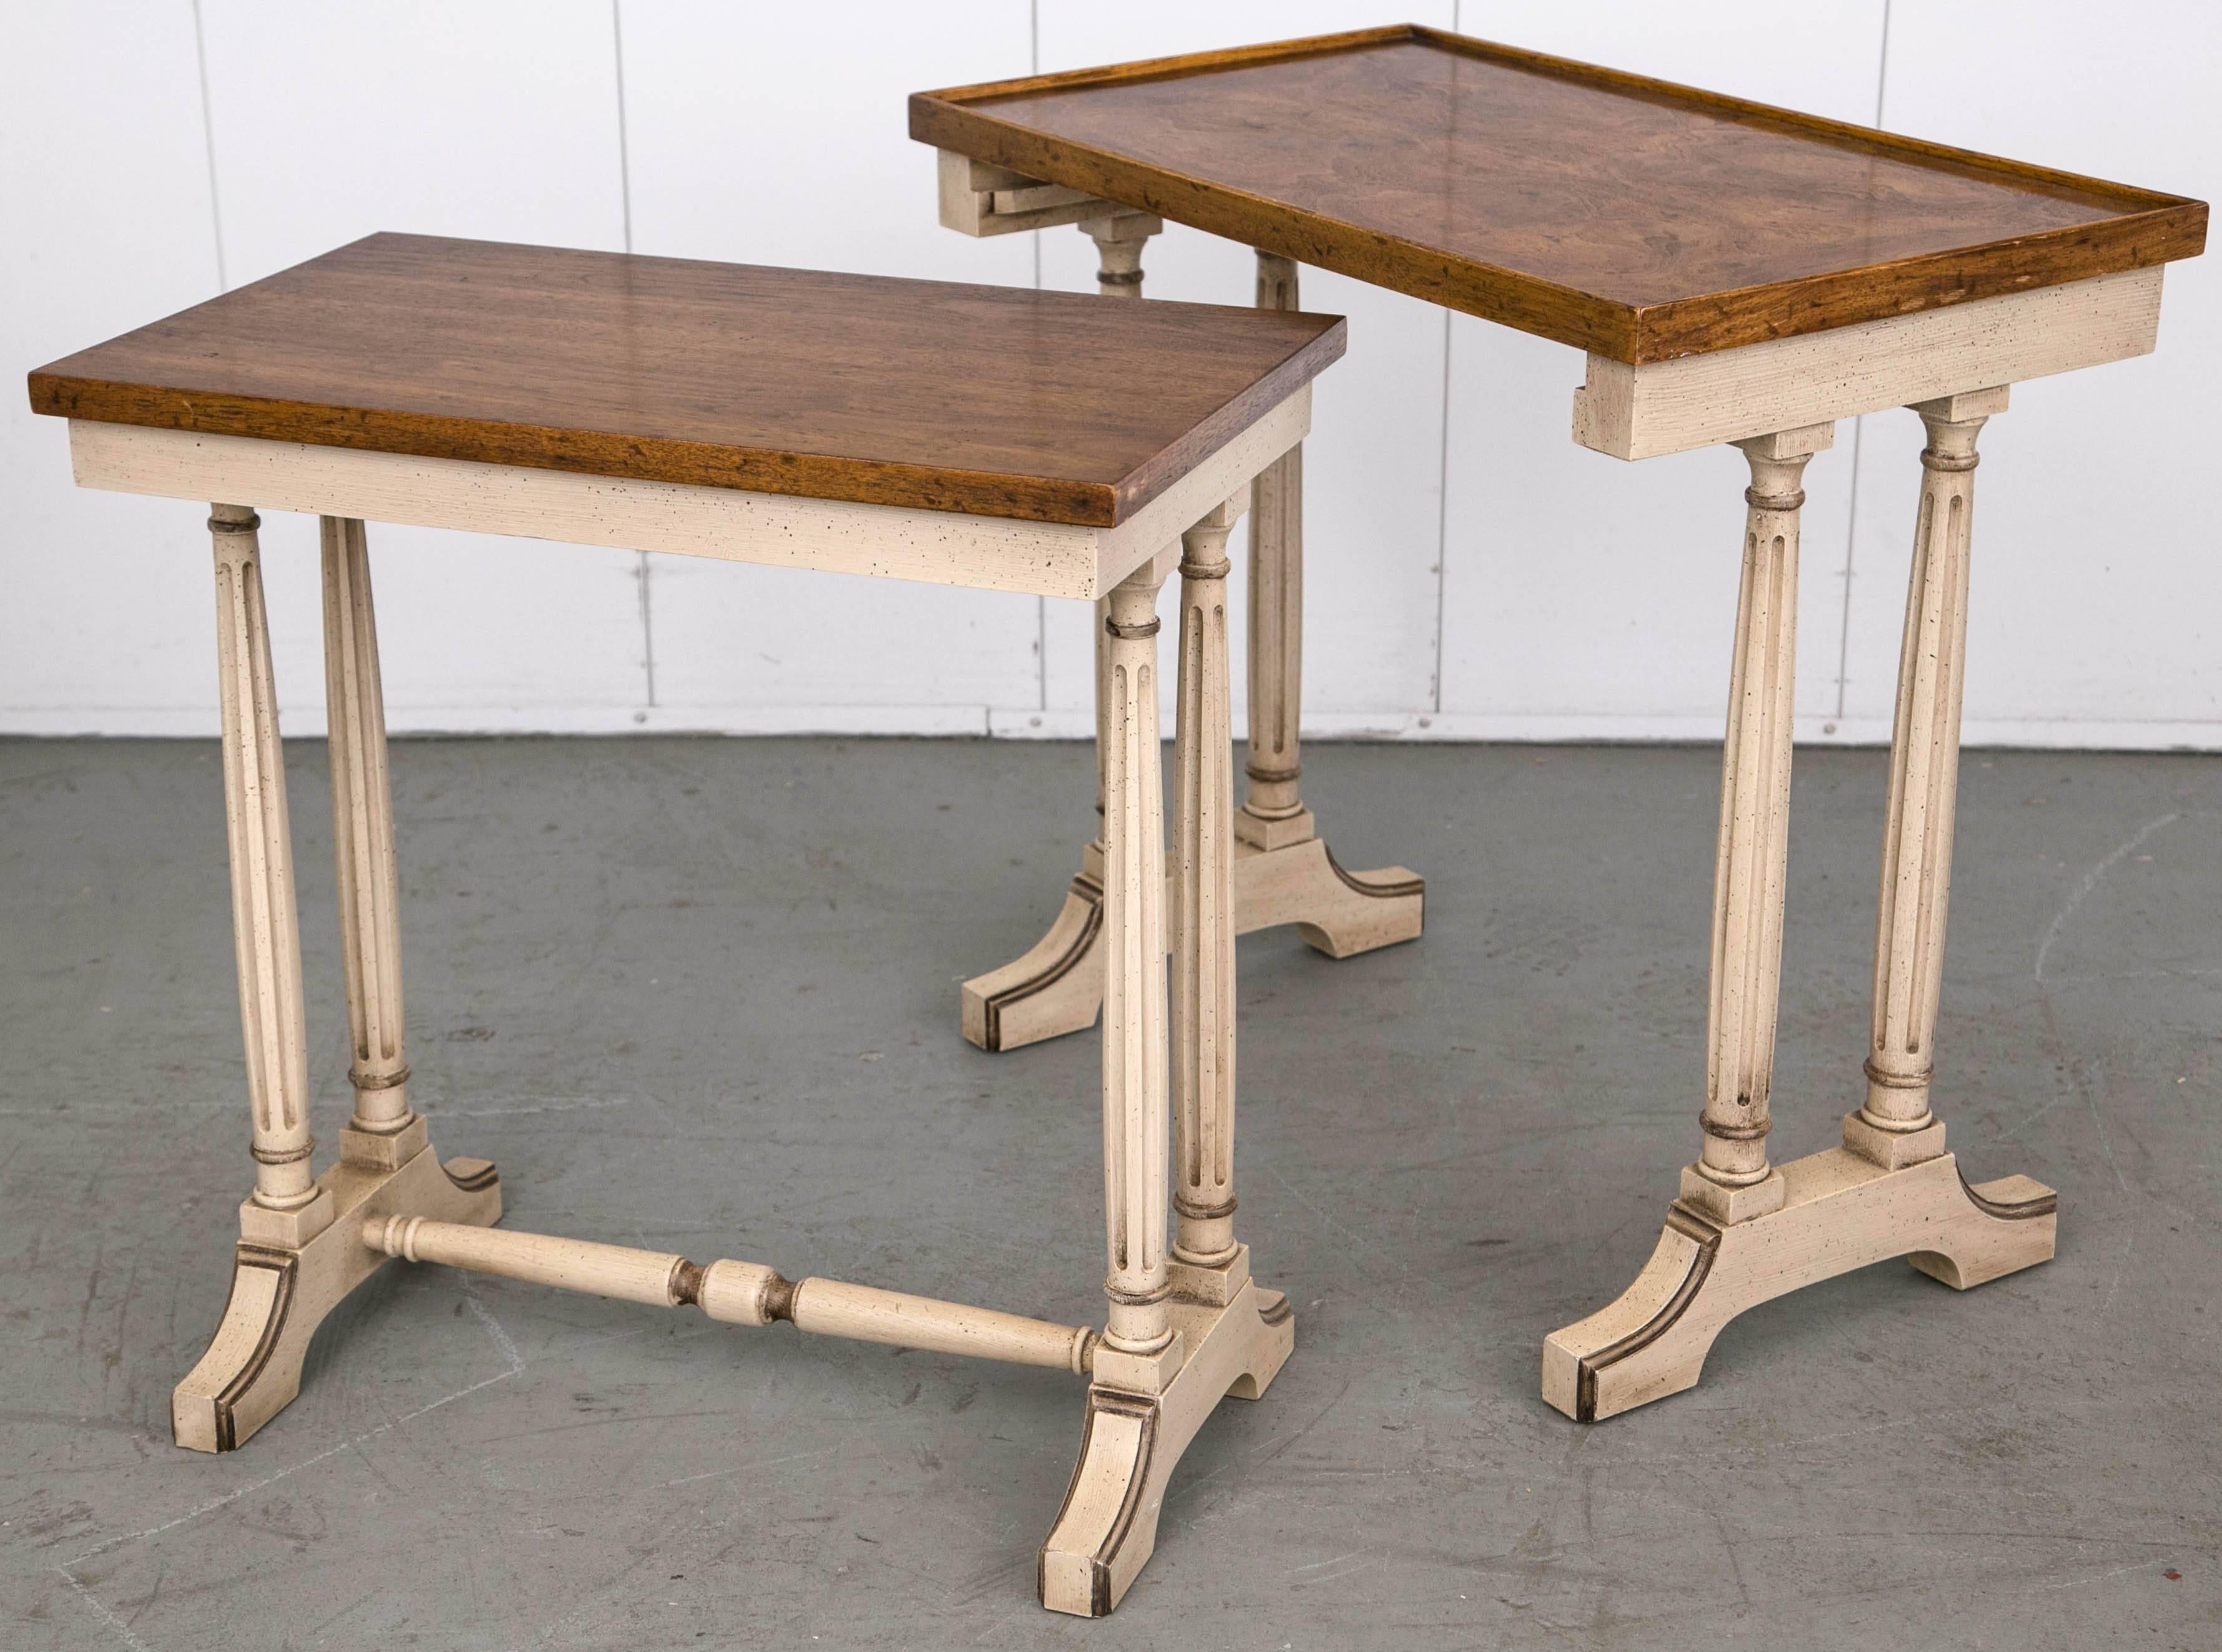 A set of two nesting tables, the lower able to slide in place beneath the upper.